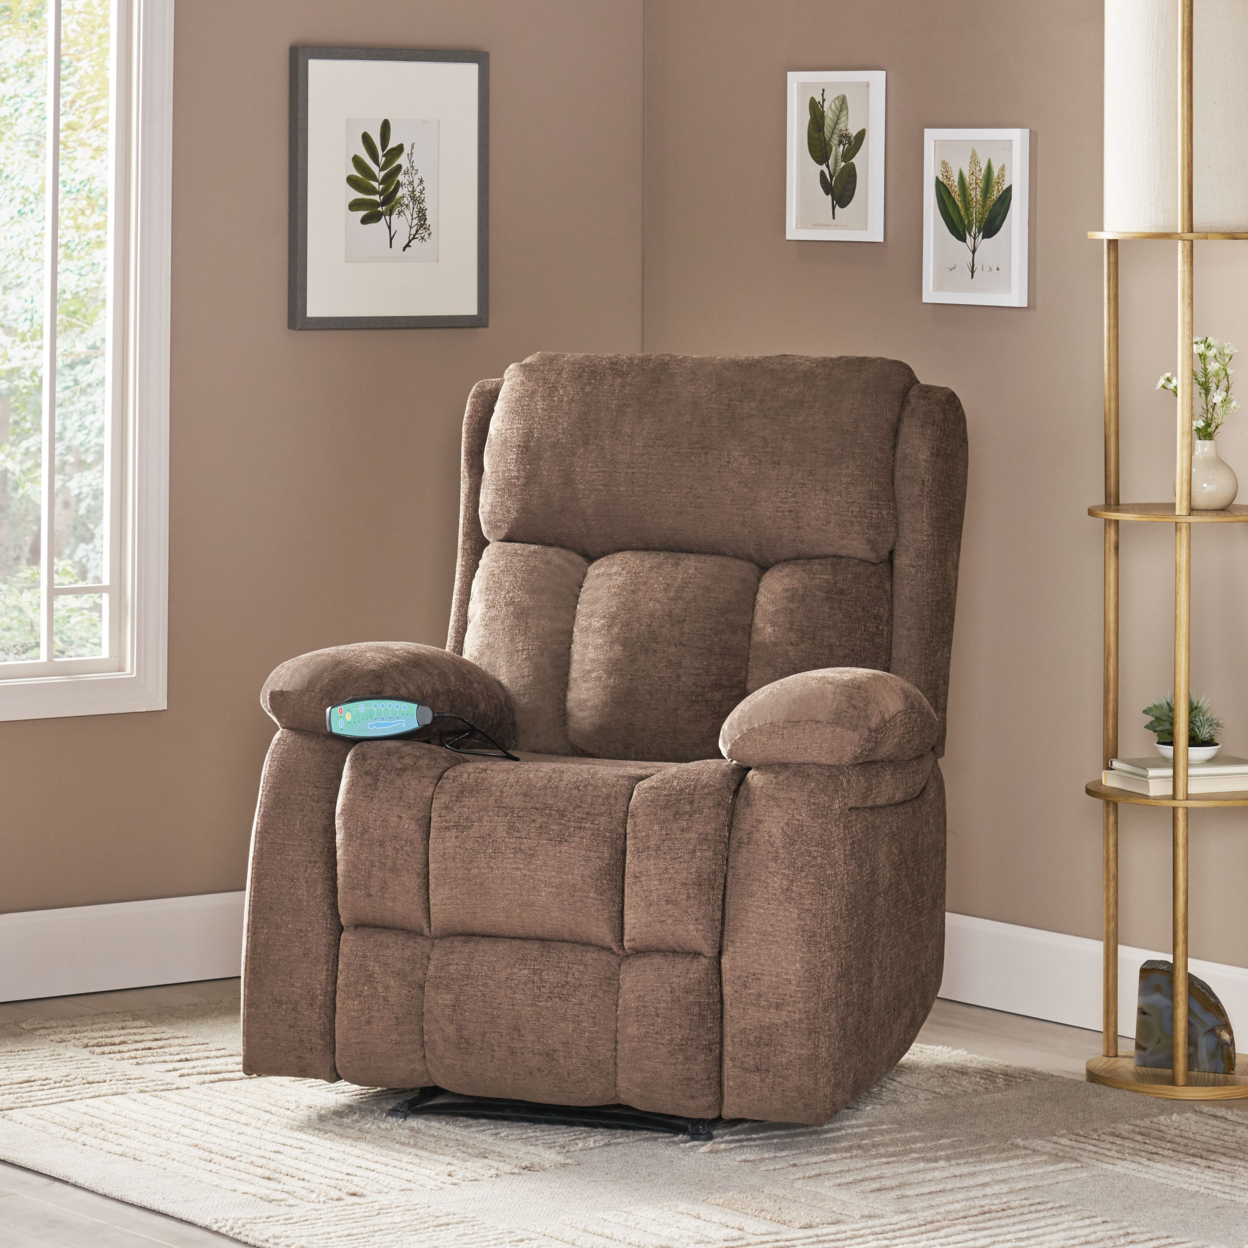 Lexie Contemporary Pillow Tufted Massage Recliner - Black/brown